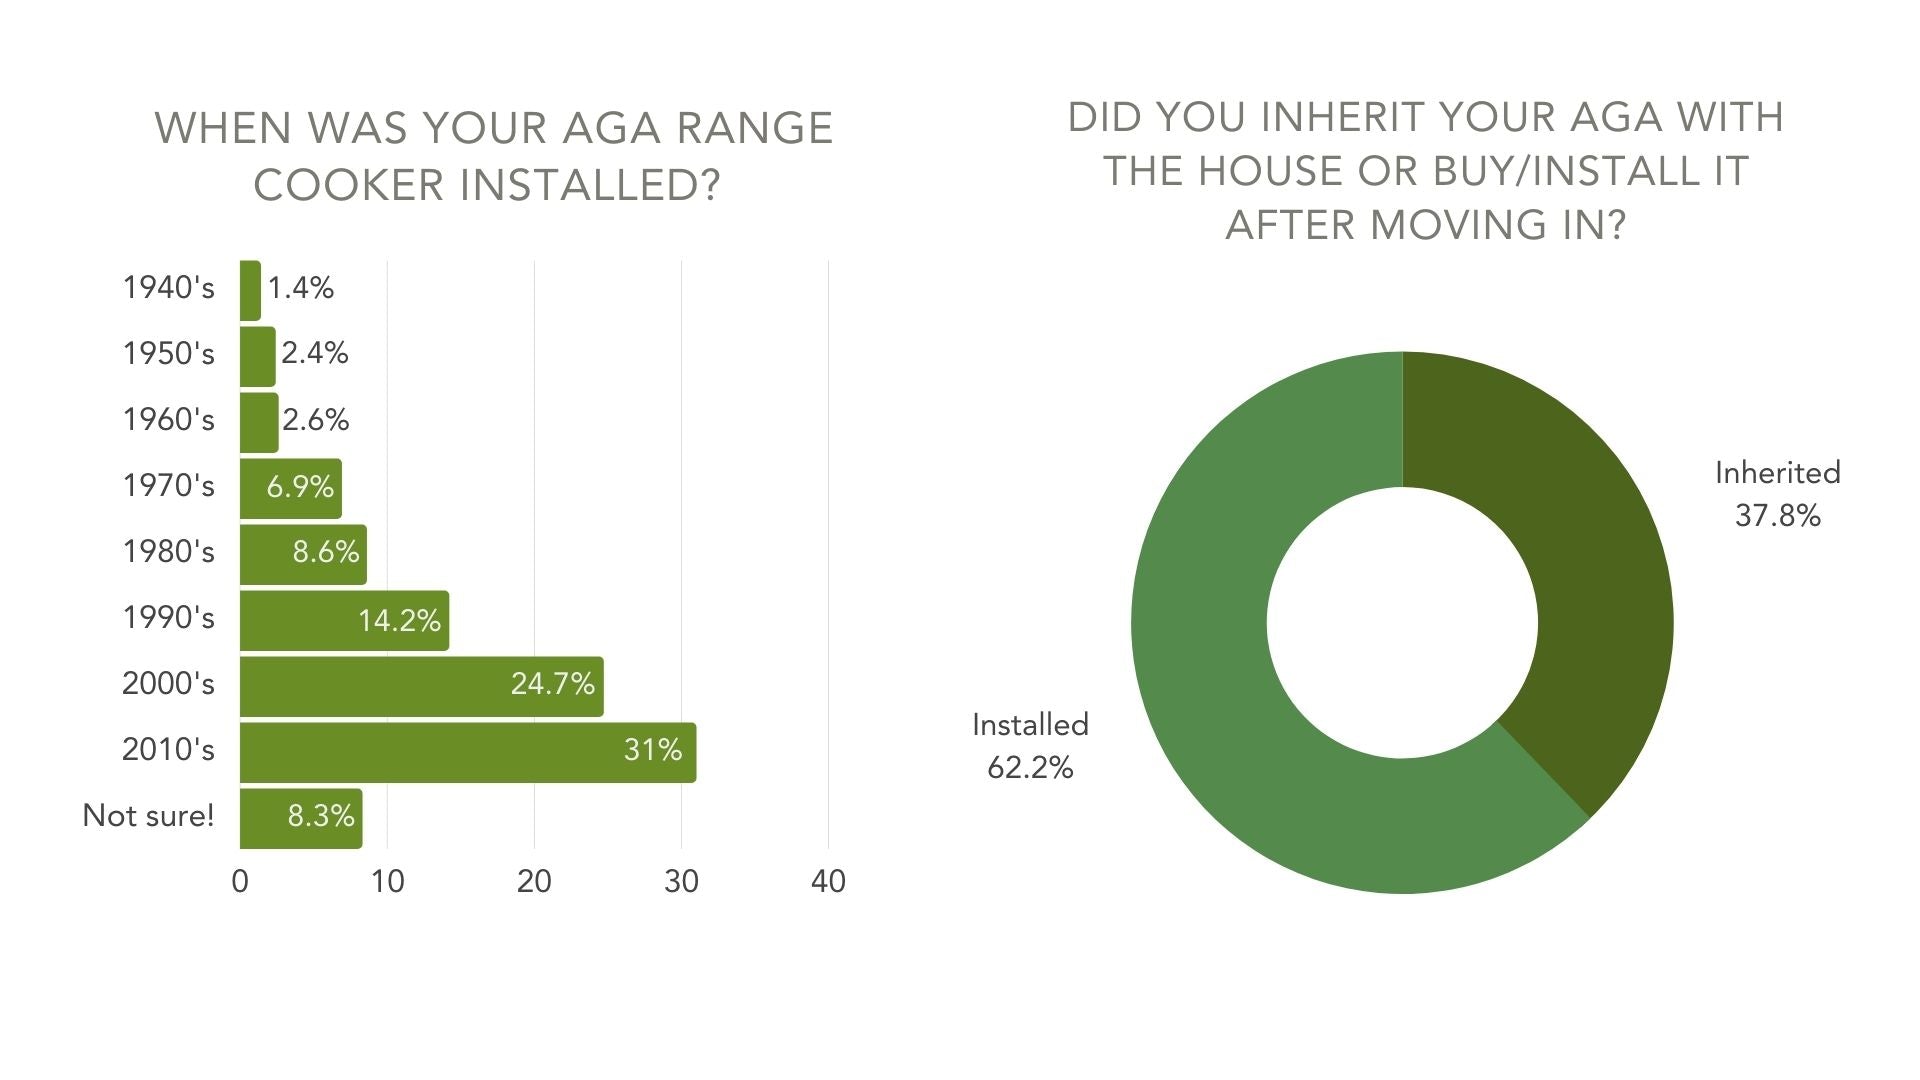 life of the aga cooker from 2021 survey